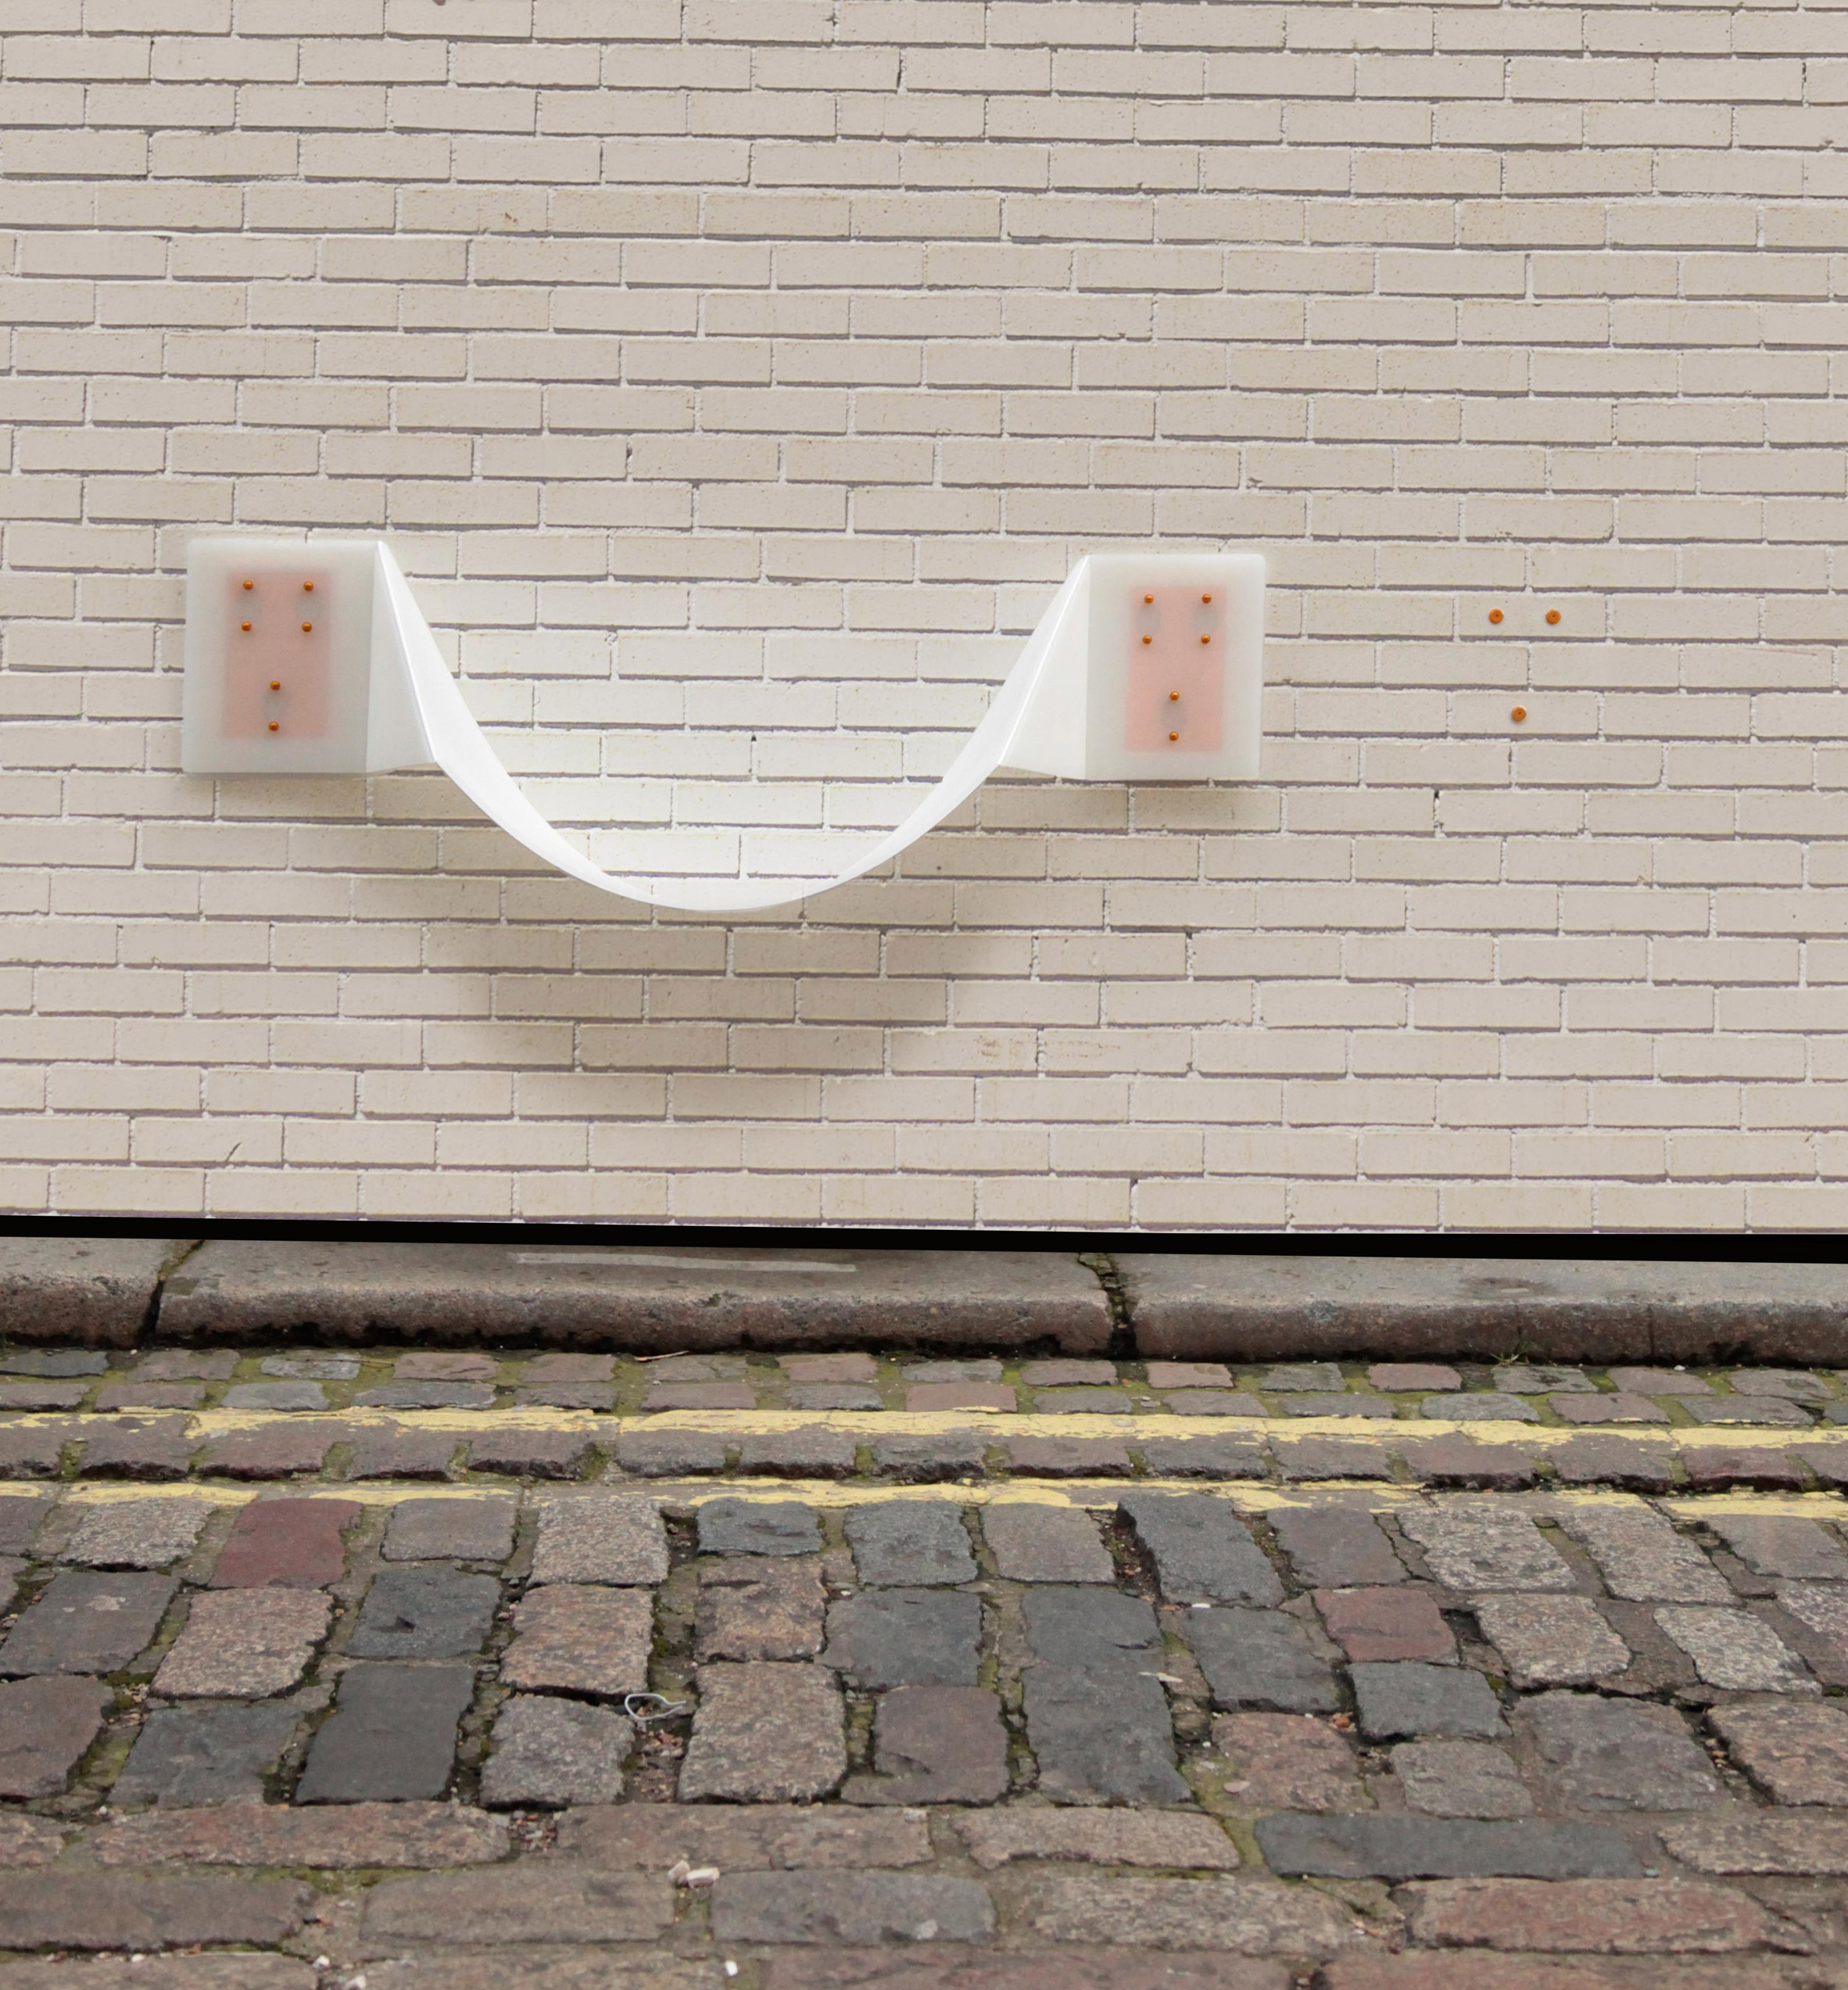 Thomas Gossner's wall-mounted Flair chair takes cues from plastic lunchboxes